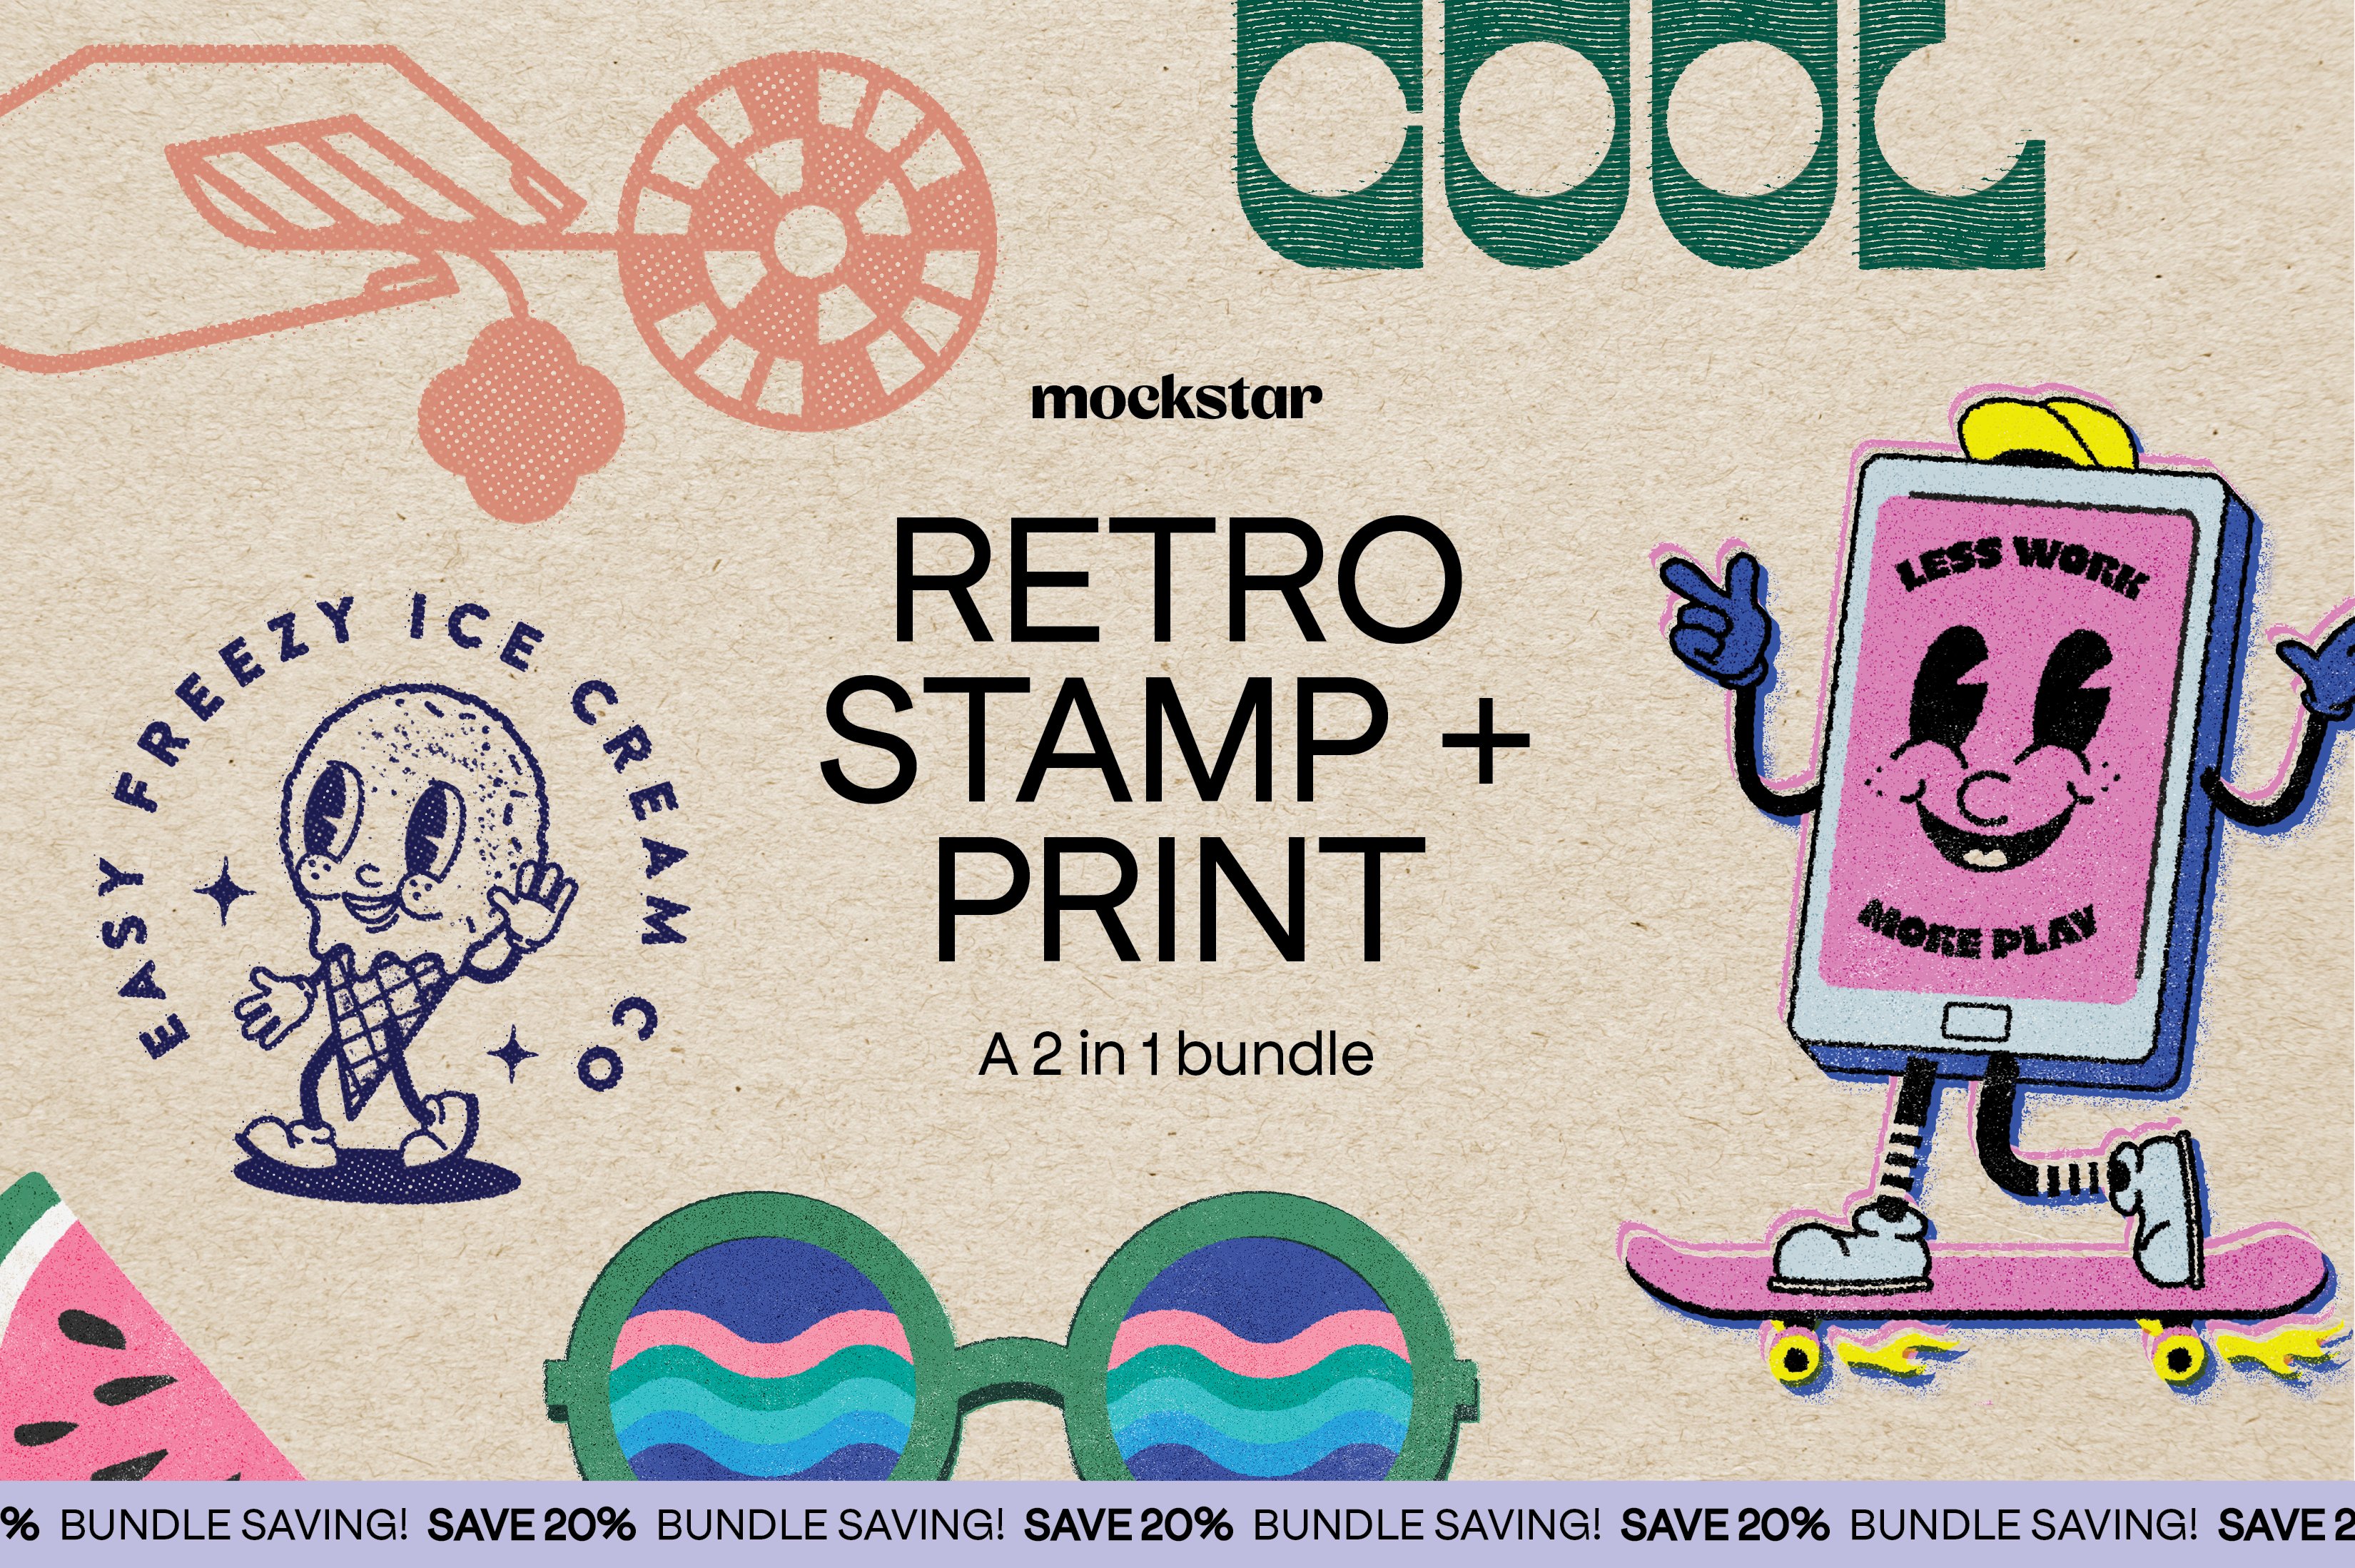 Vintage Stamp and Retro Print Combocover image.